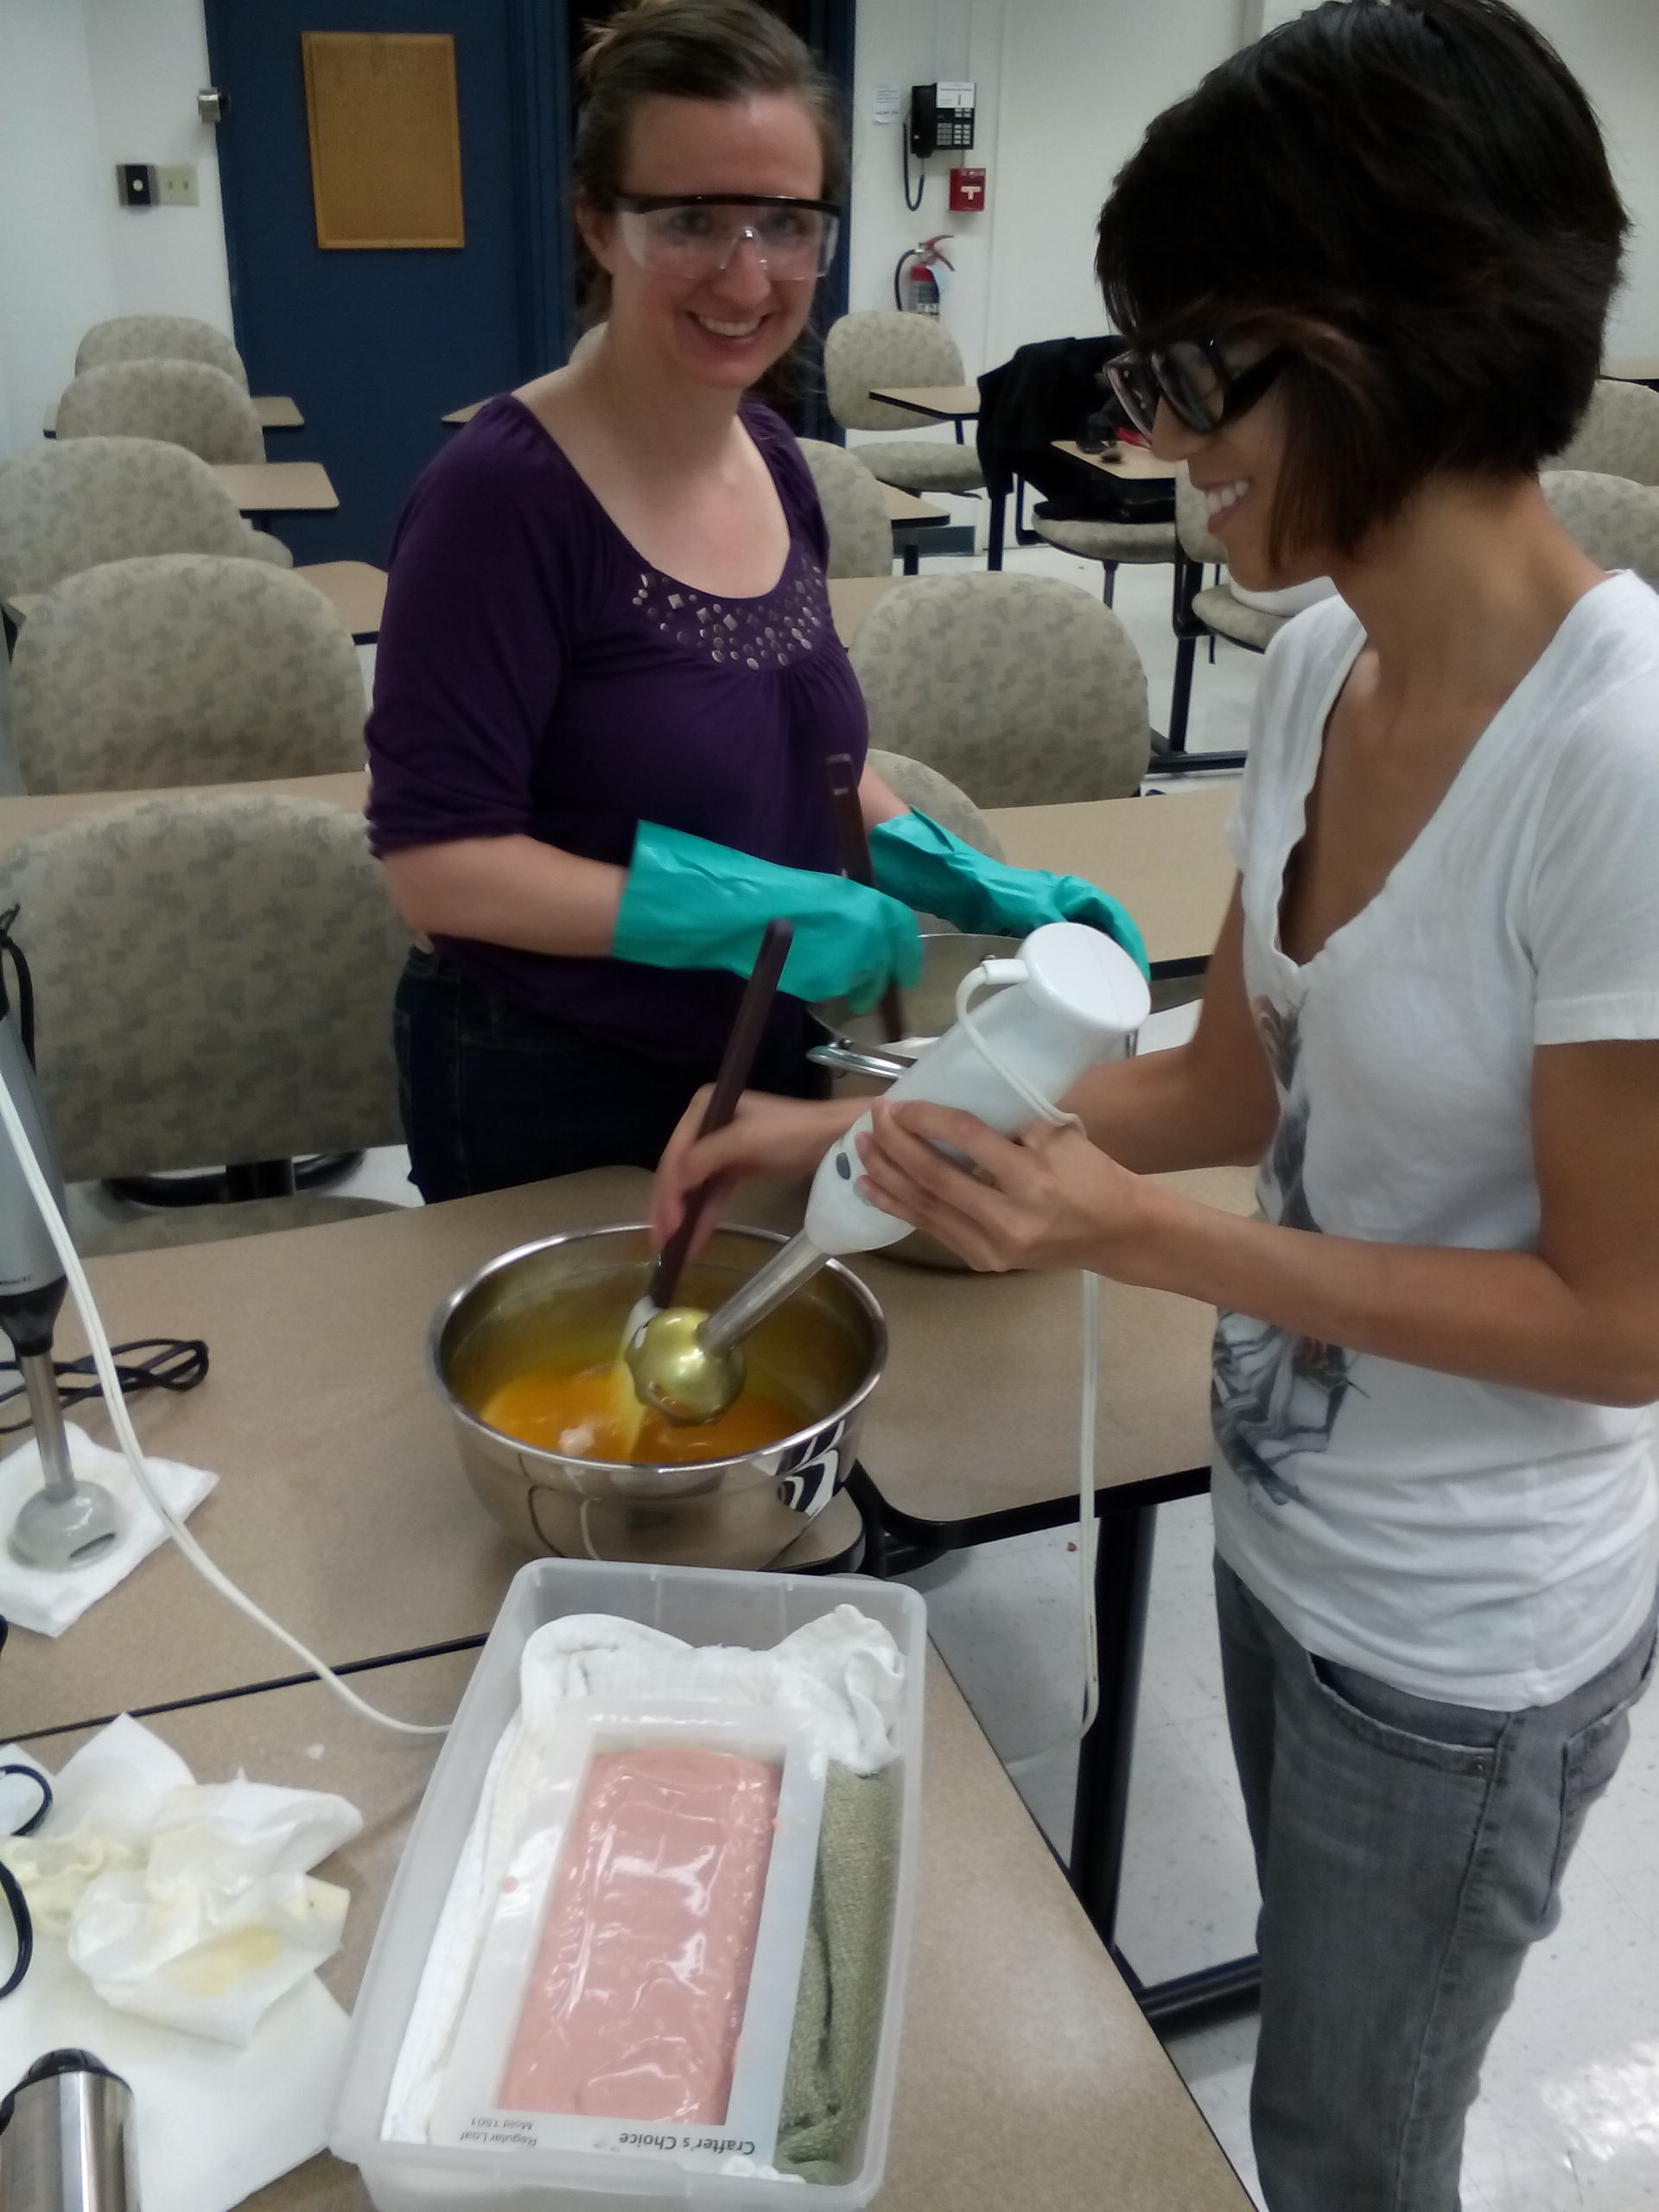 Students in a community college soapmaking class, taught by Mixon.